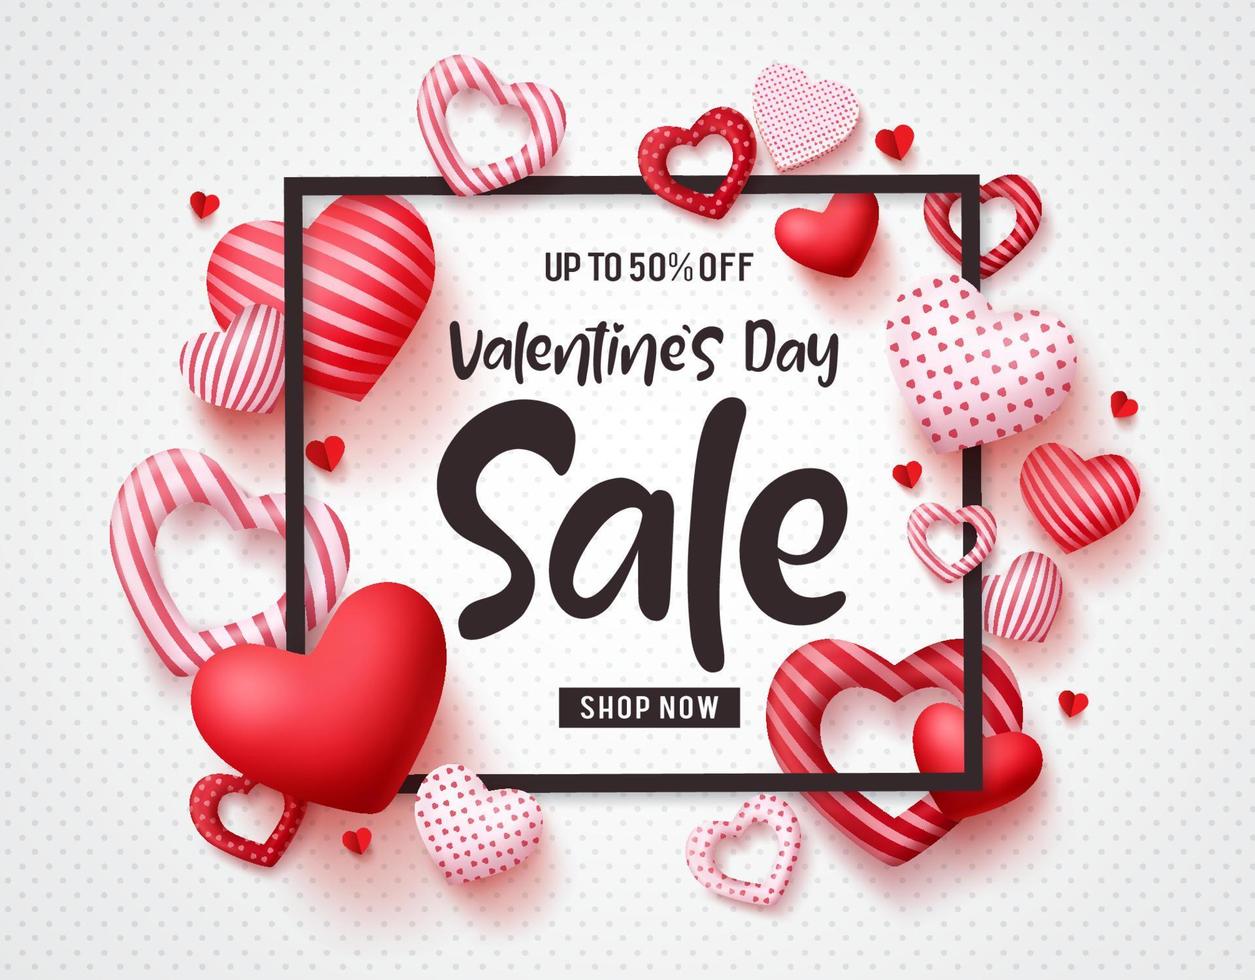 Valentines day sale vector banner template with sale promotion text, hearts elements and a frame in white pattern background. Vector illustration.